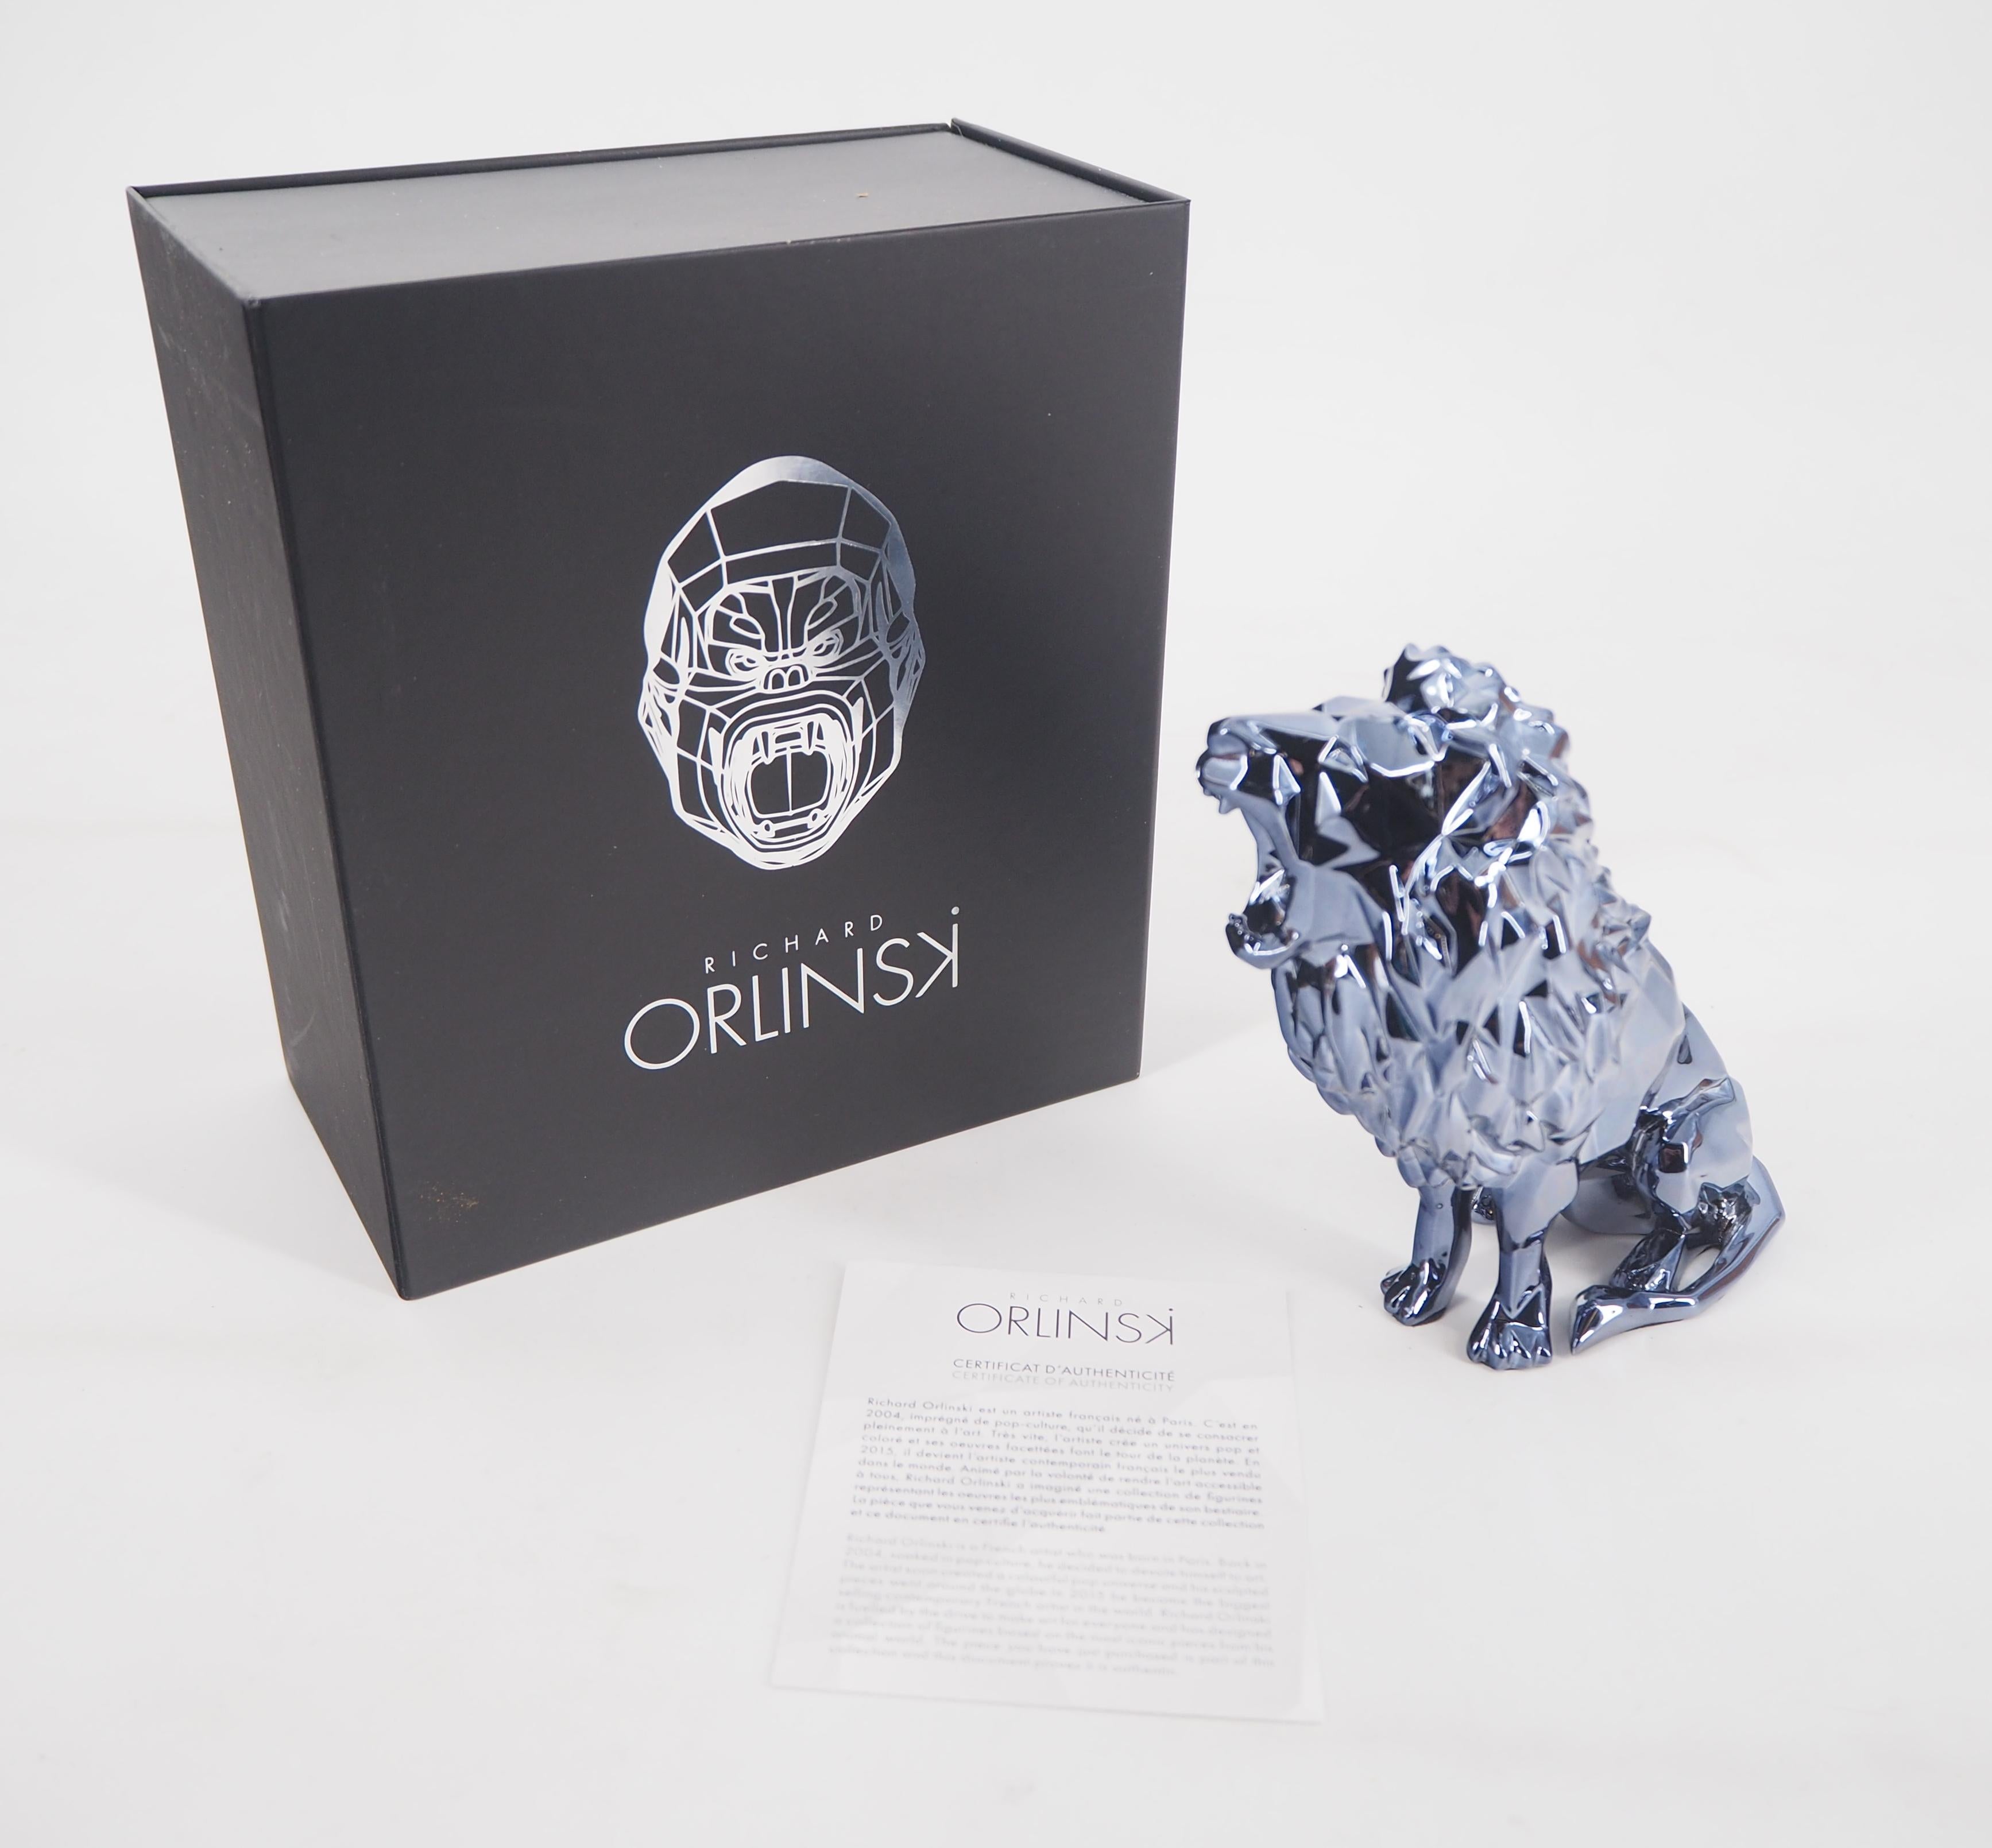 Richard ORLINSKI
Roaring Lion Spirit (Petrol Edition)

Sculpture in resin
Metallic petrol
About 13 x 13 x 5 cm (c. 5,1 x 5,1 x 1,9 in)
Presented in original box with certificate

Excellent condition